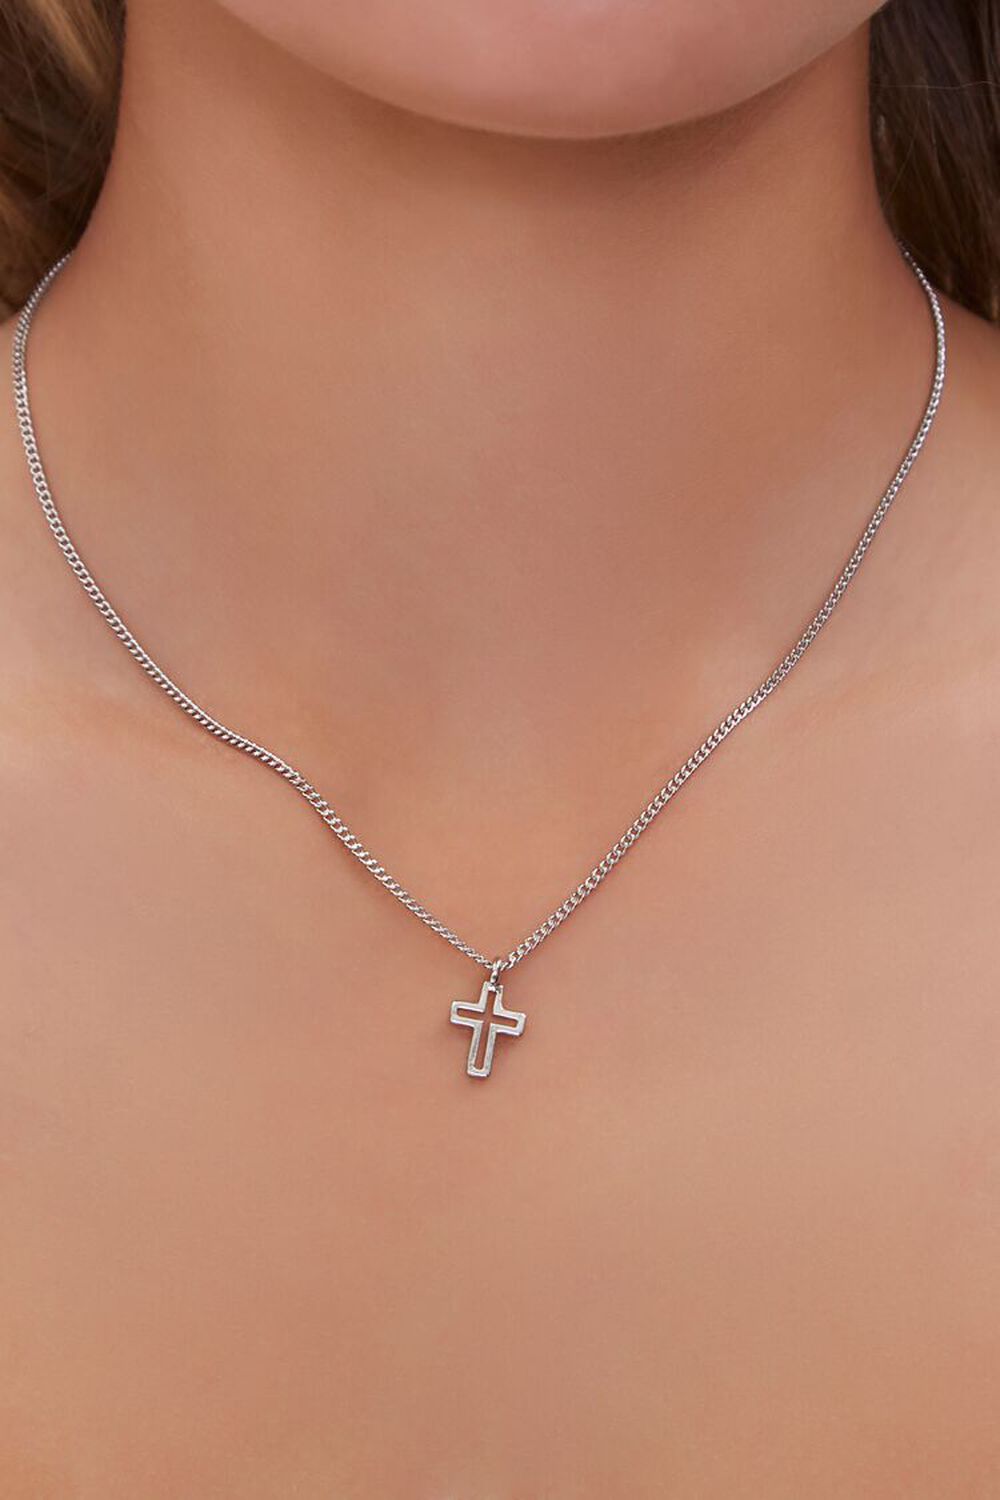 SILVER Cutout Cross Charm Necklace, image 1